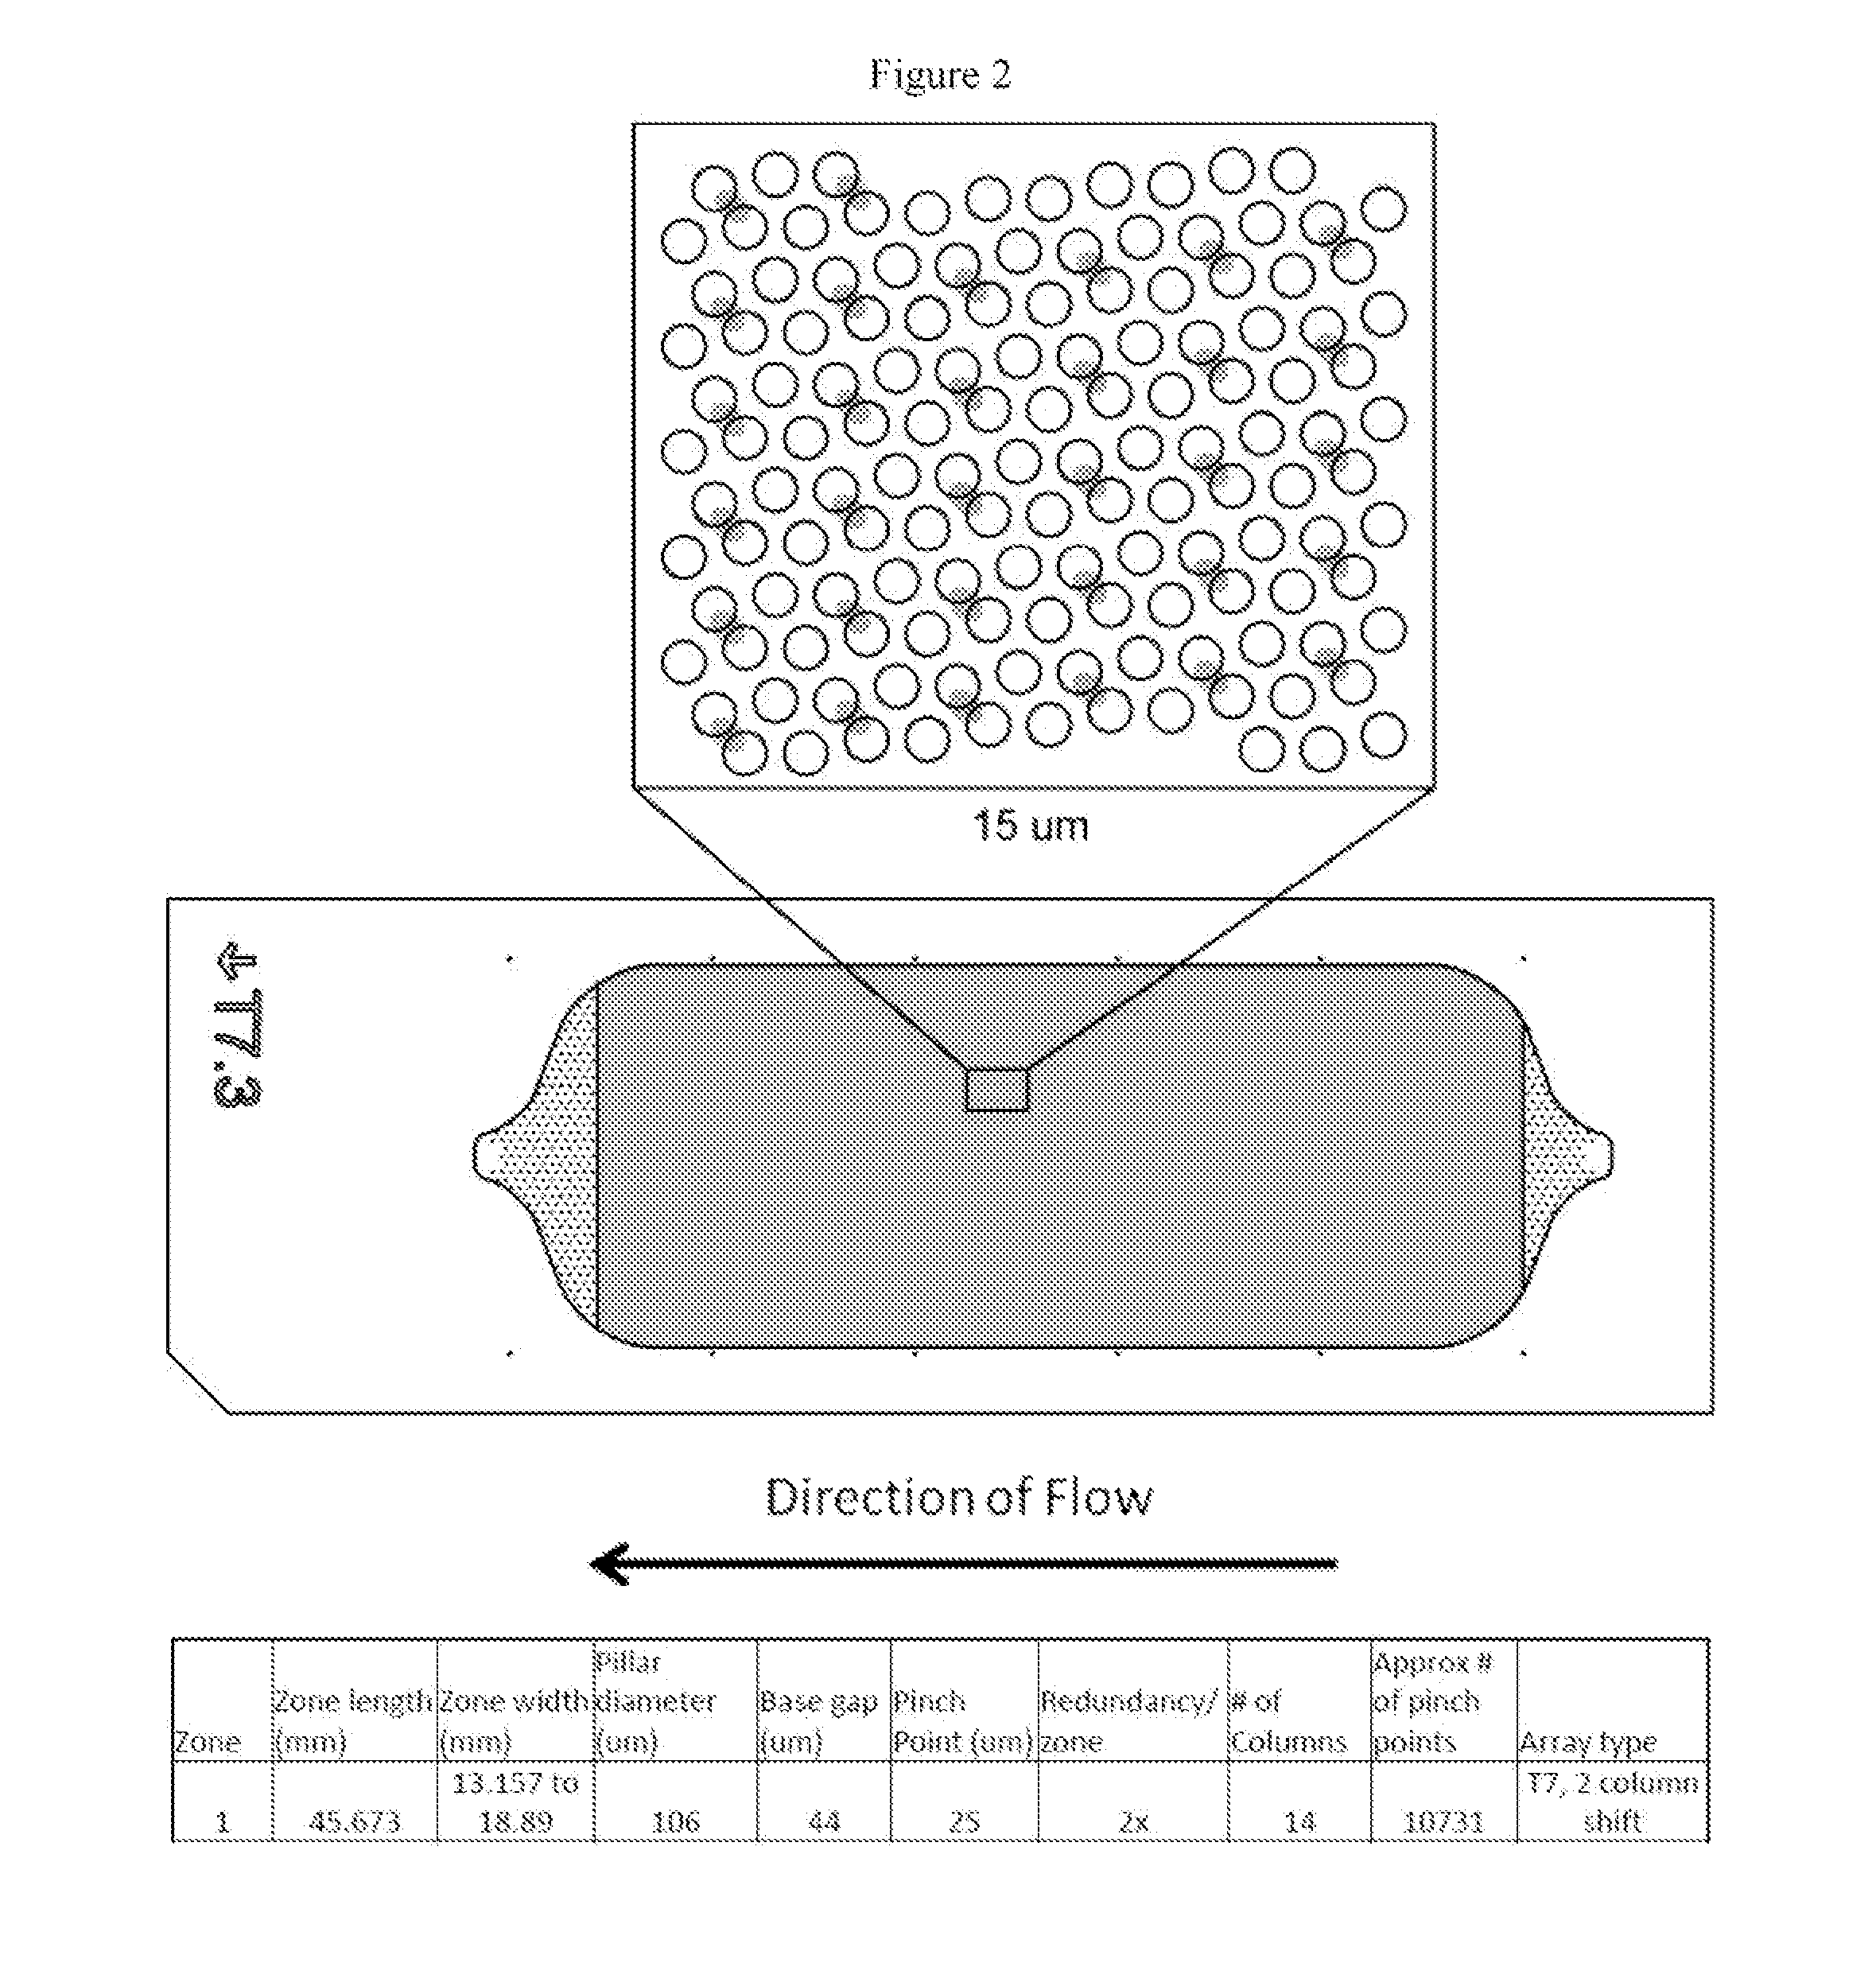 Circulating tumor cell capture on a microfluidic chip incorporating both affinity and size